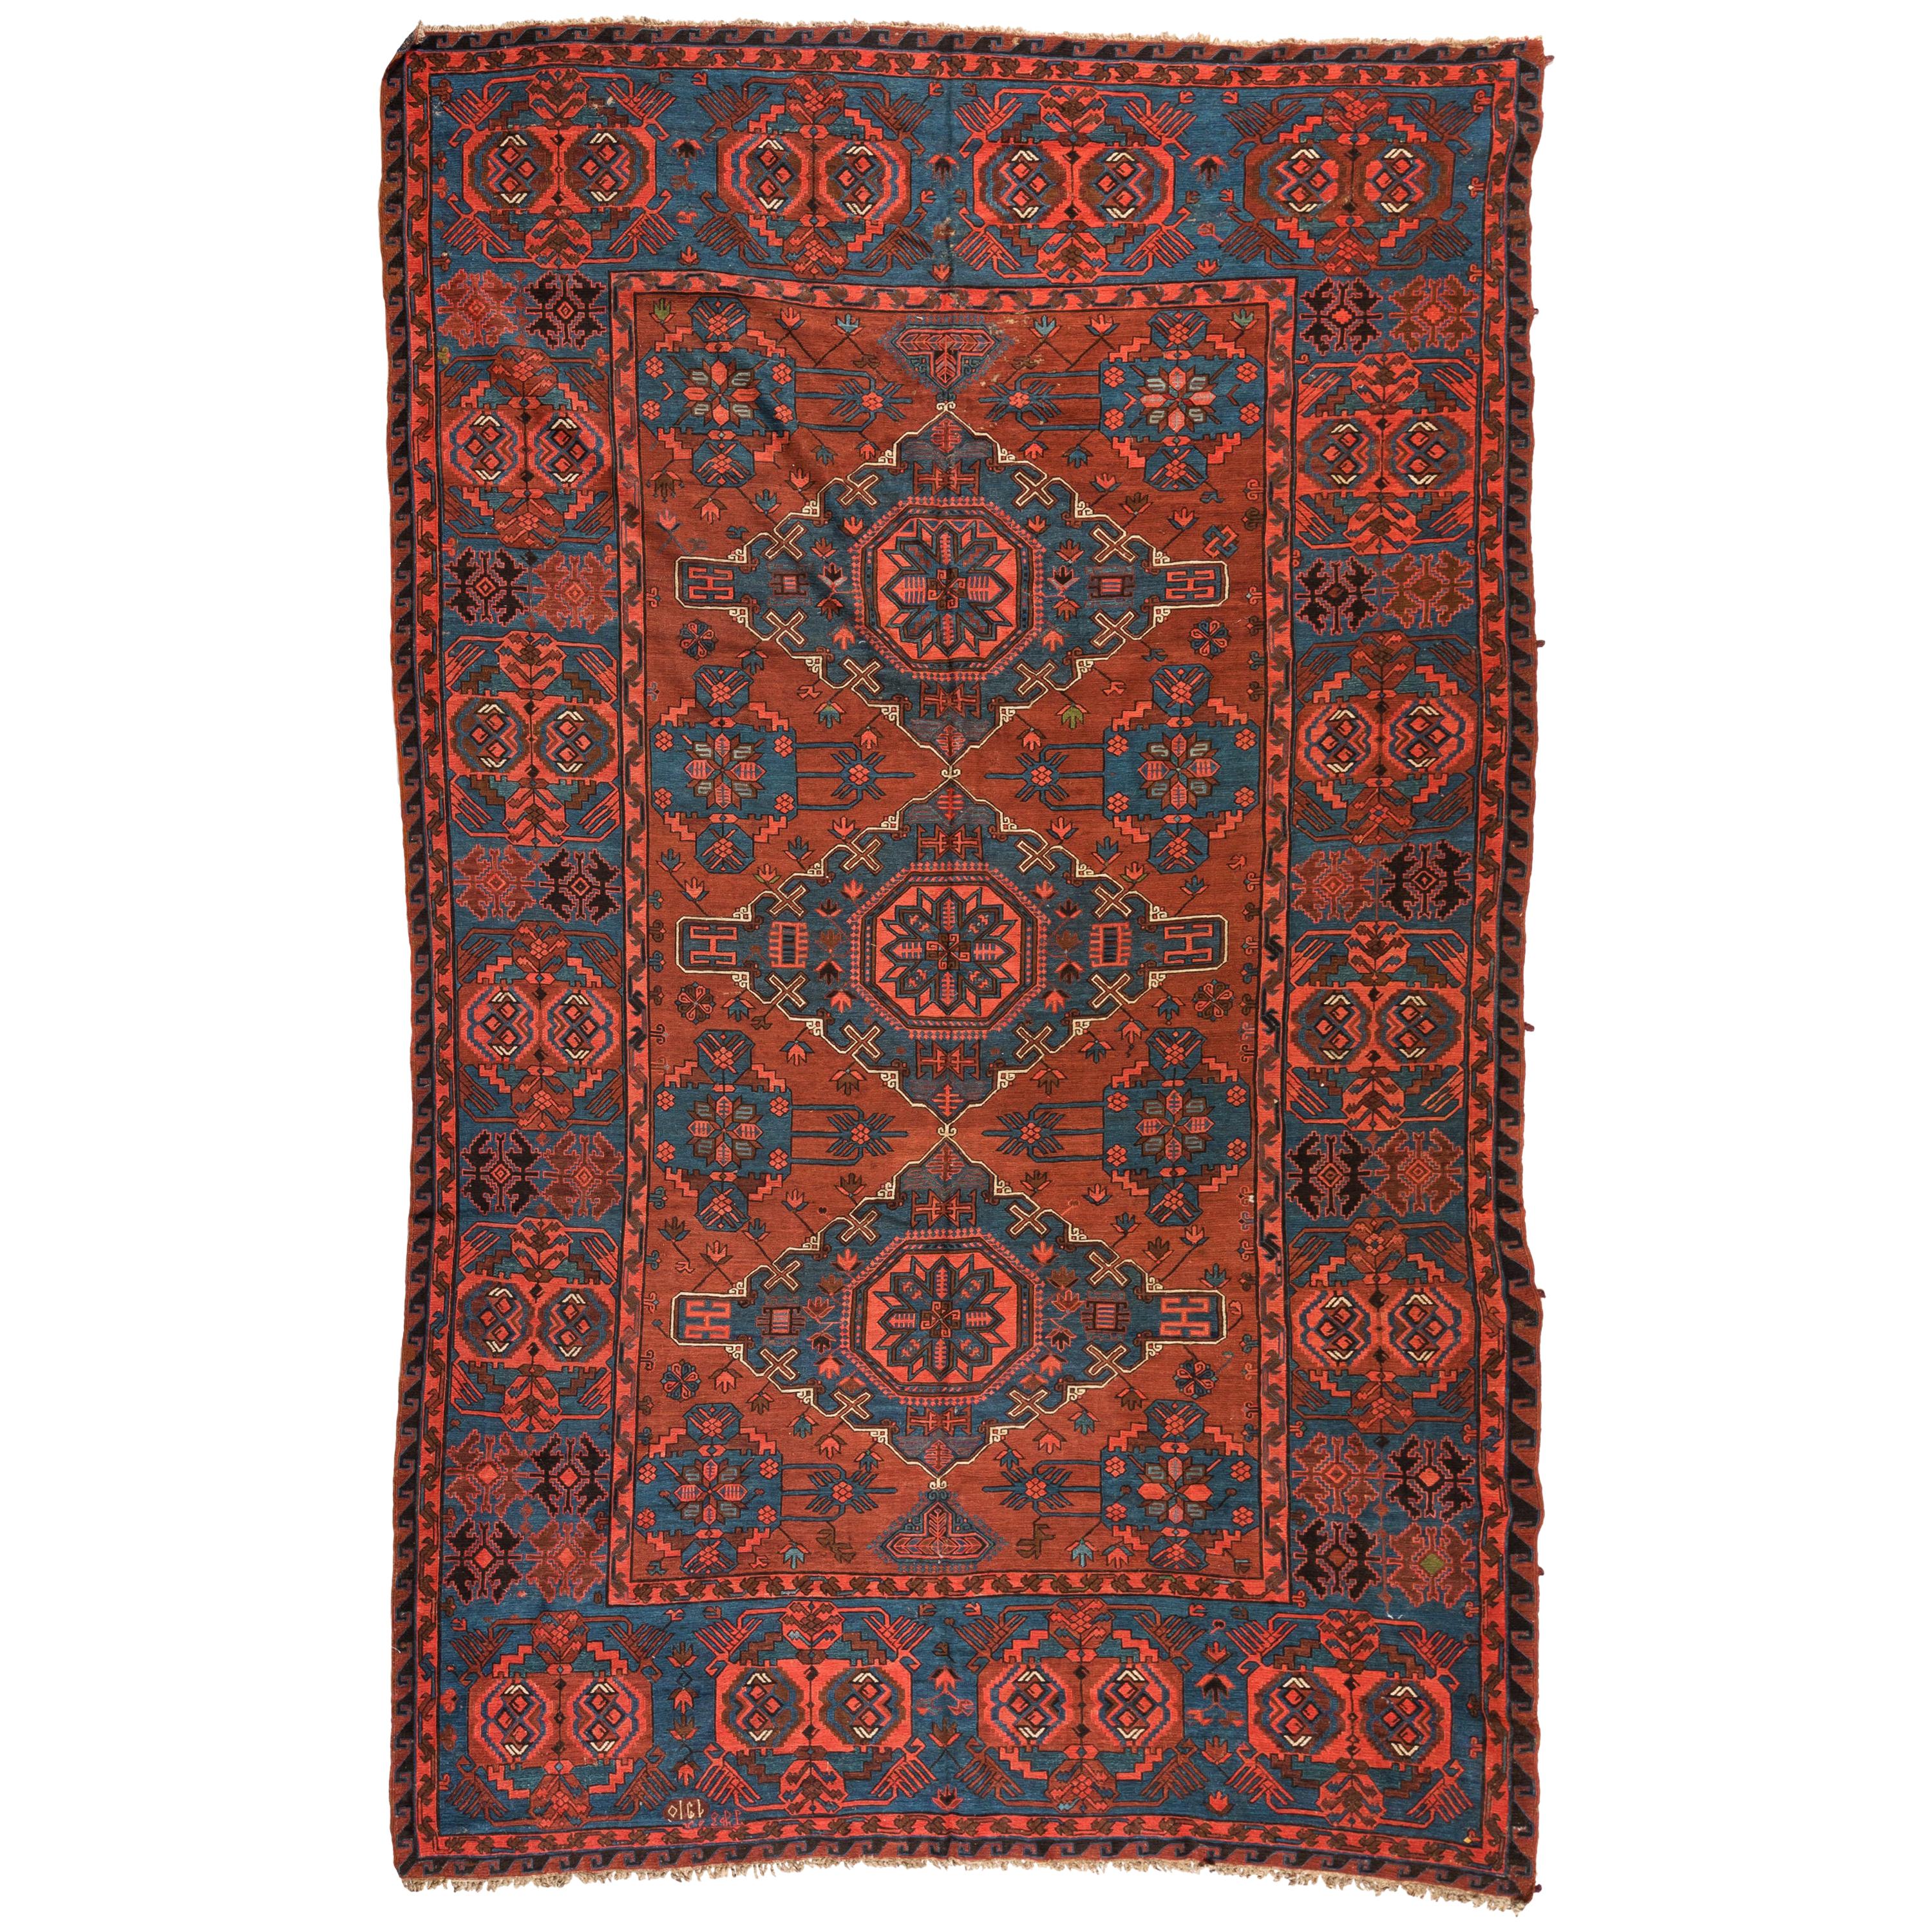 Antique Vintage Red and Blue Caucasian Soumak Tribal Flat-Weave Rug, circa 1930s For Sale